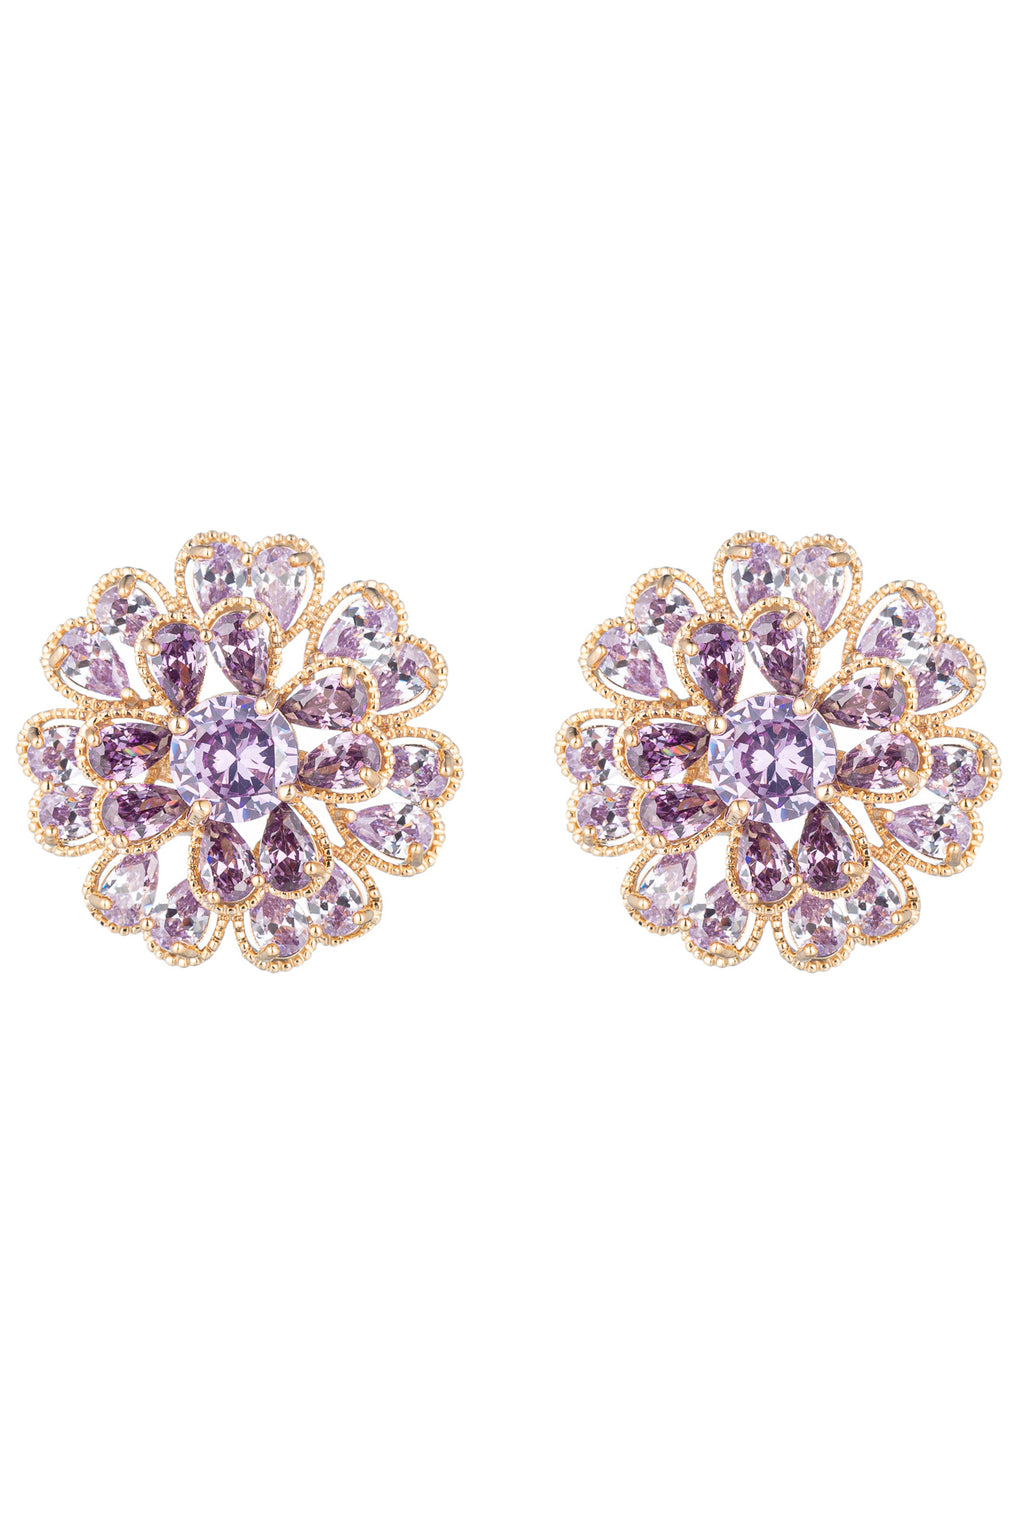 Gold tone brass stud earrings studded with purple CZ crystals.